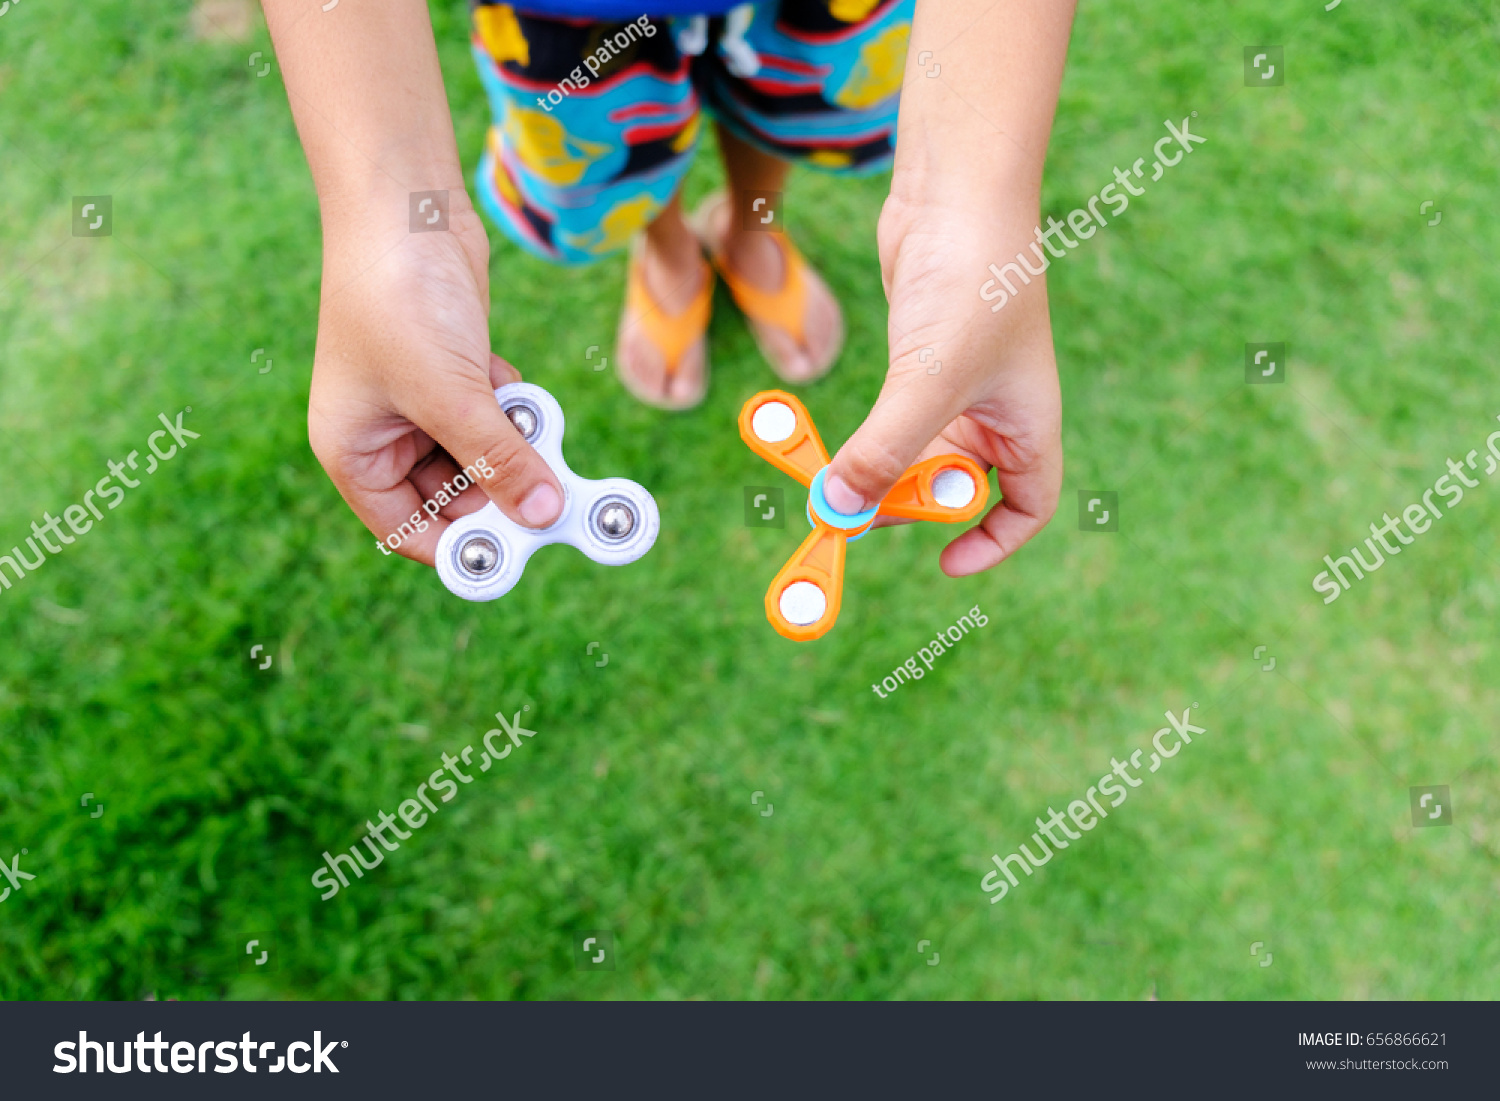 Boy holding play two fidget spinners, Fidget spinner white and orange color spinning stress relieving toy on green grass background.  #656866621